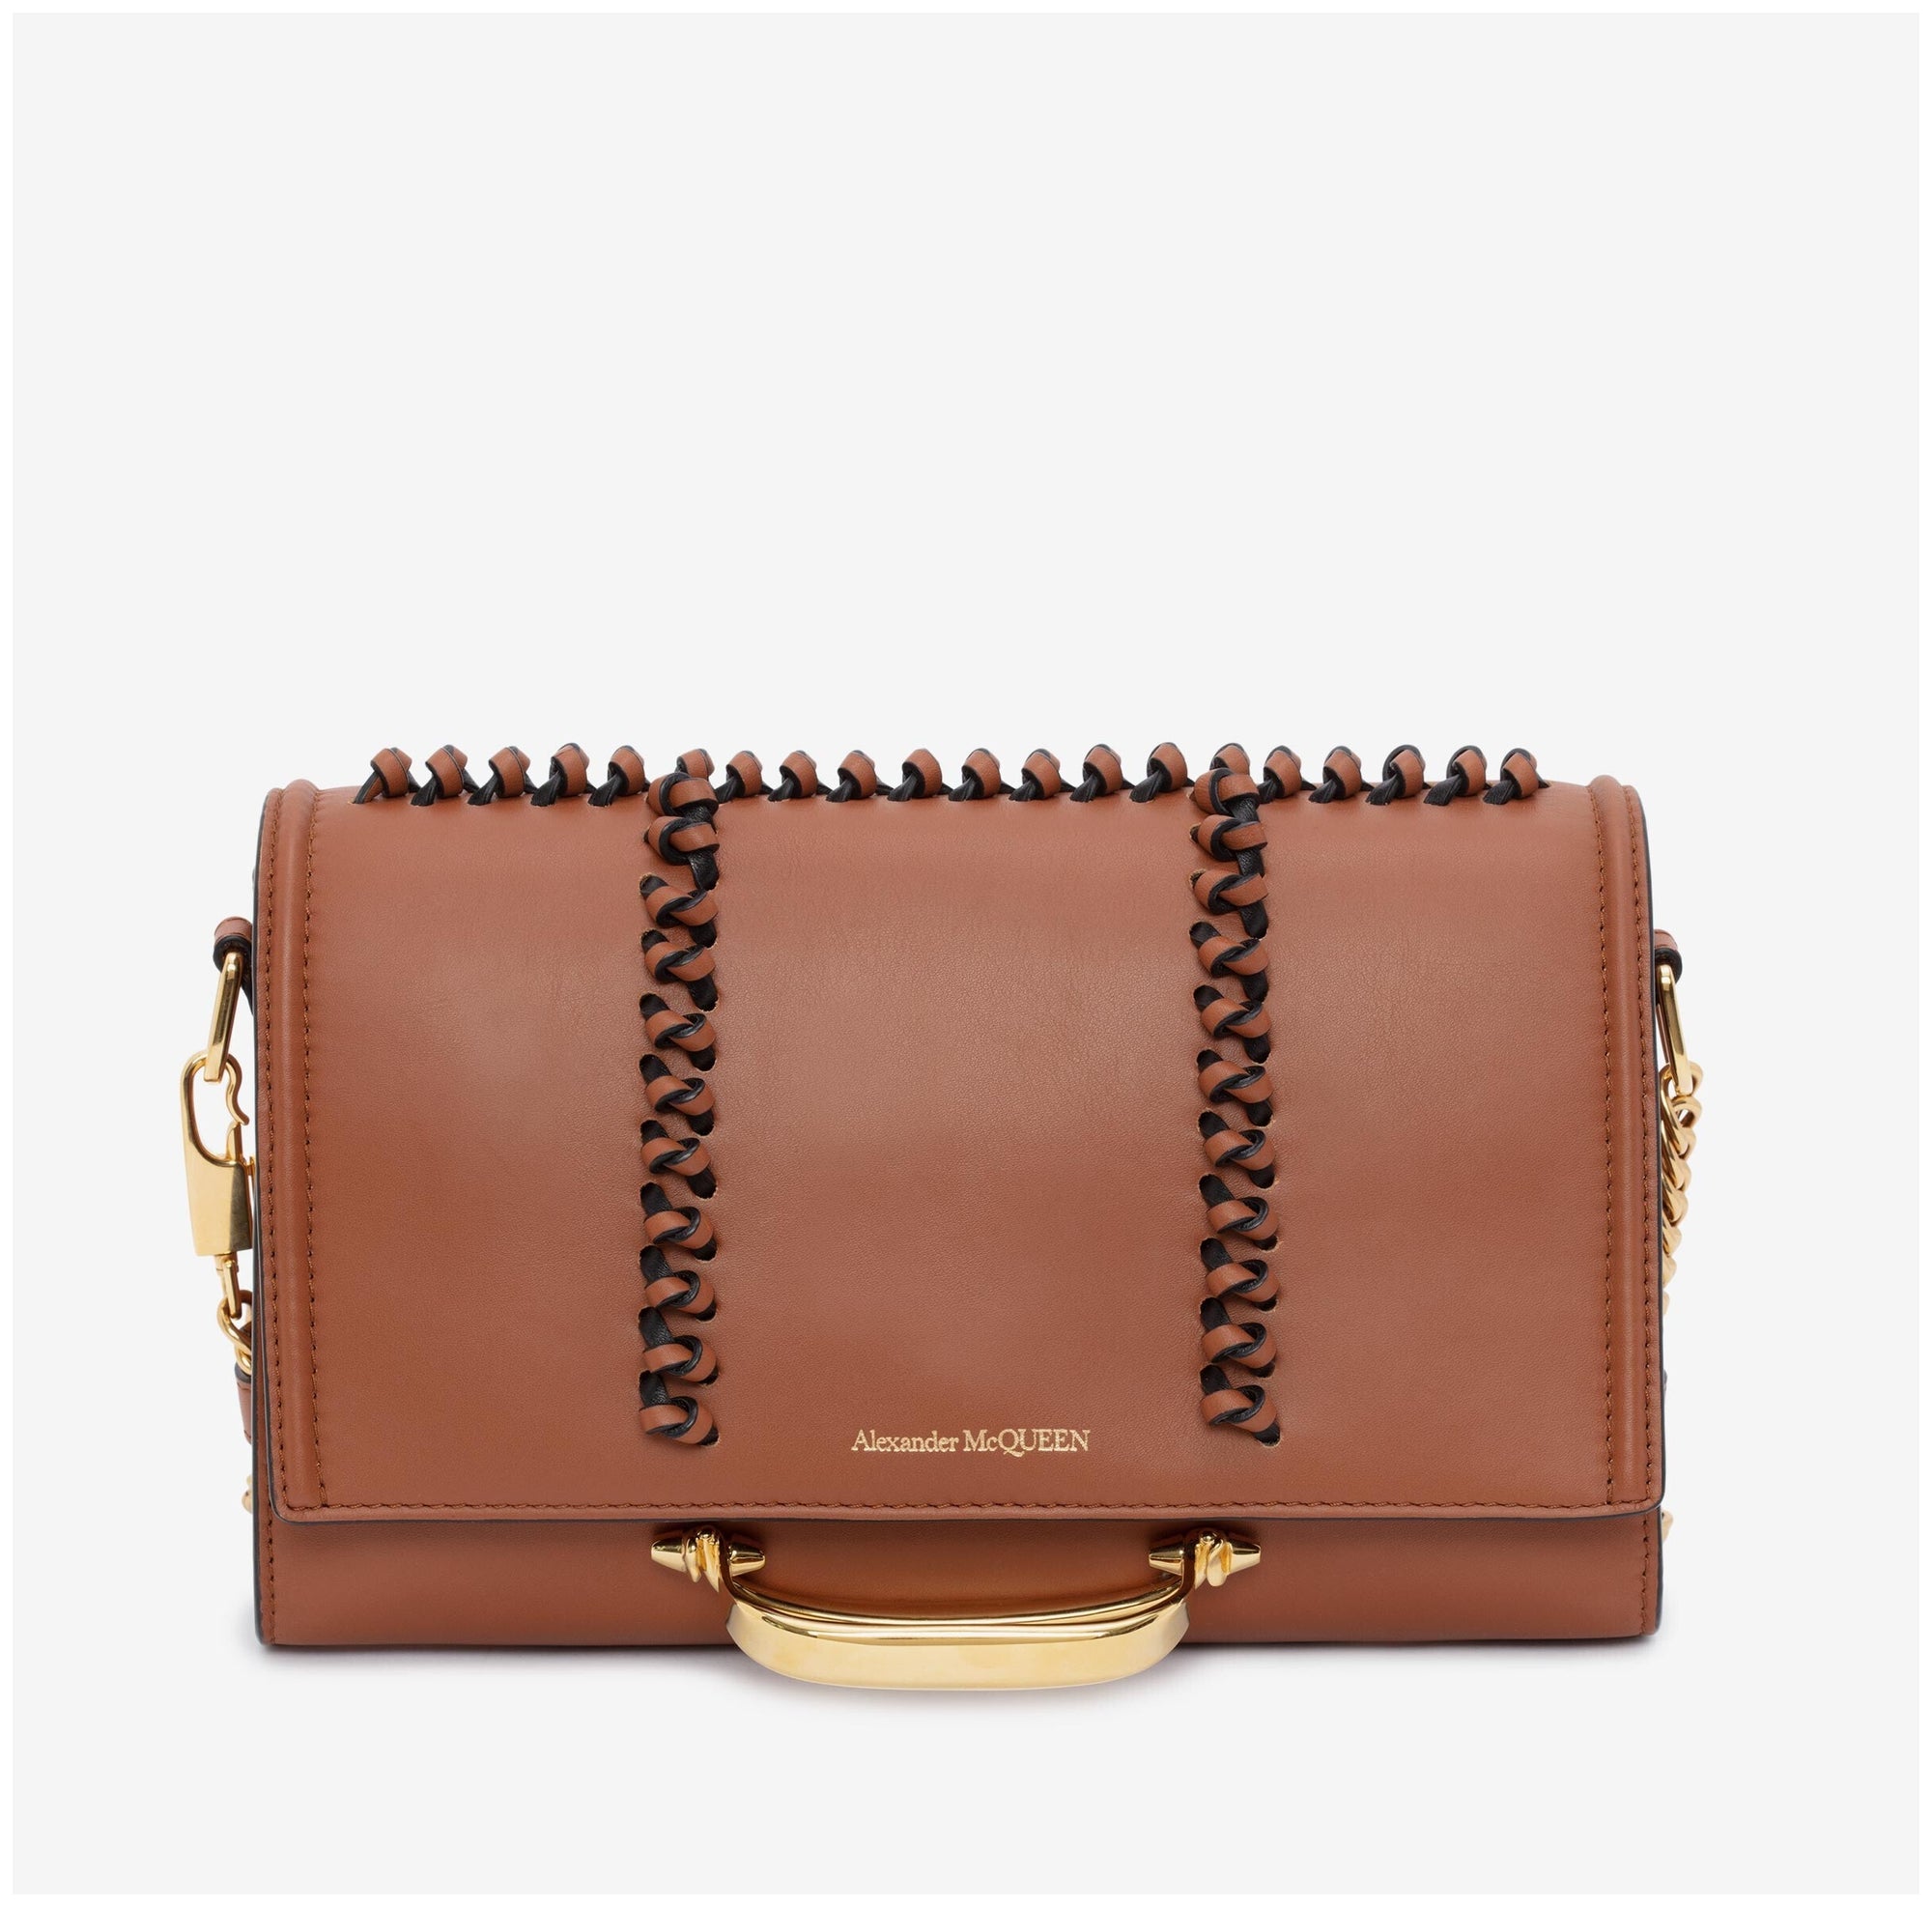 Alexander McQueen The Story Knotted Brown Handbag 631472 at_Queen_Bee_of_Beverly_Hills